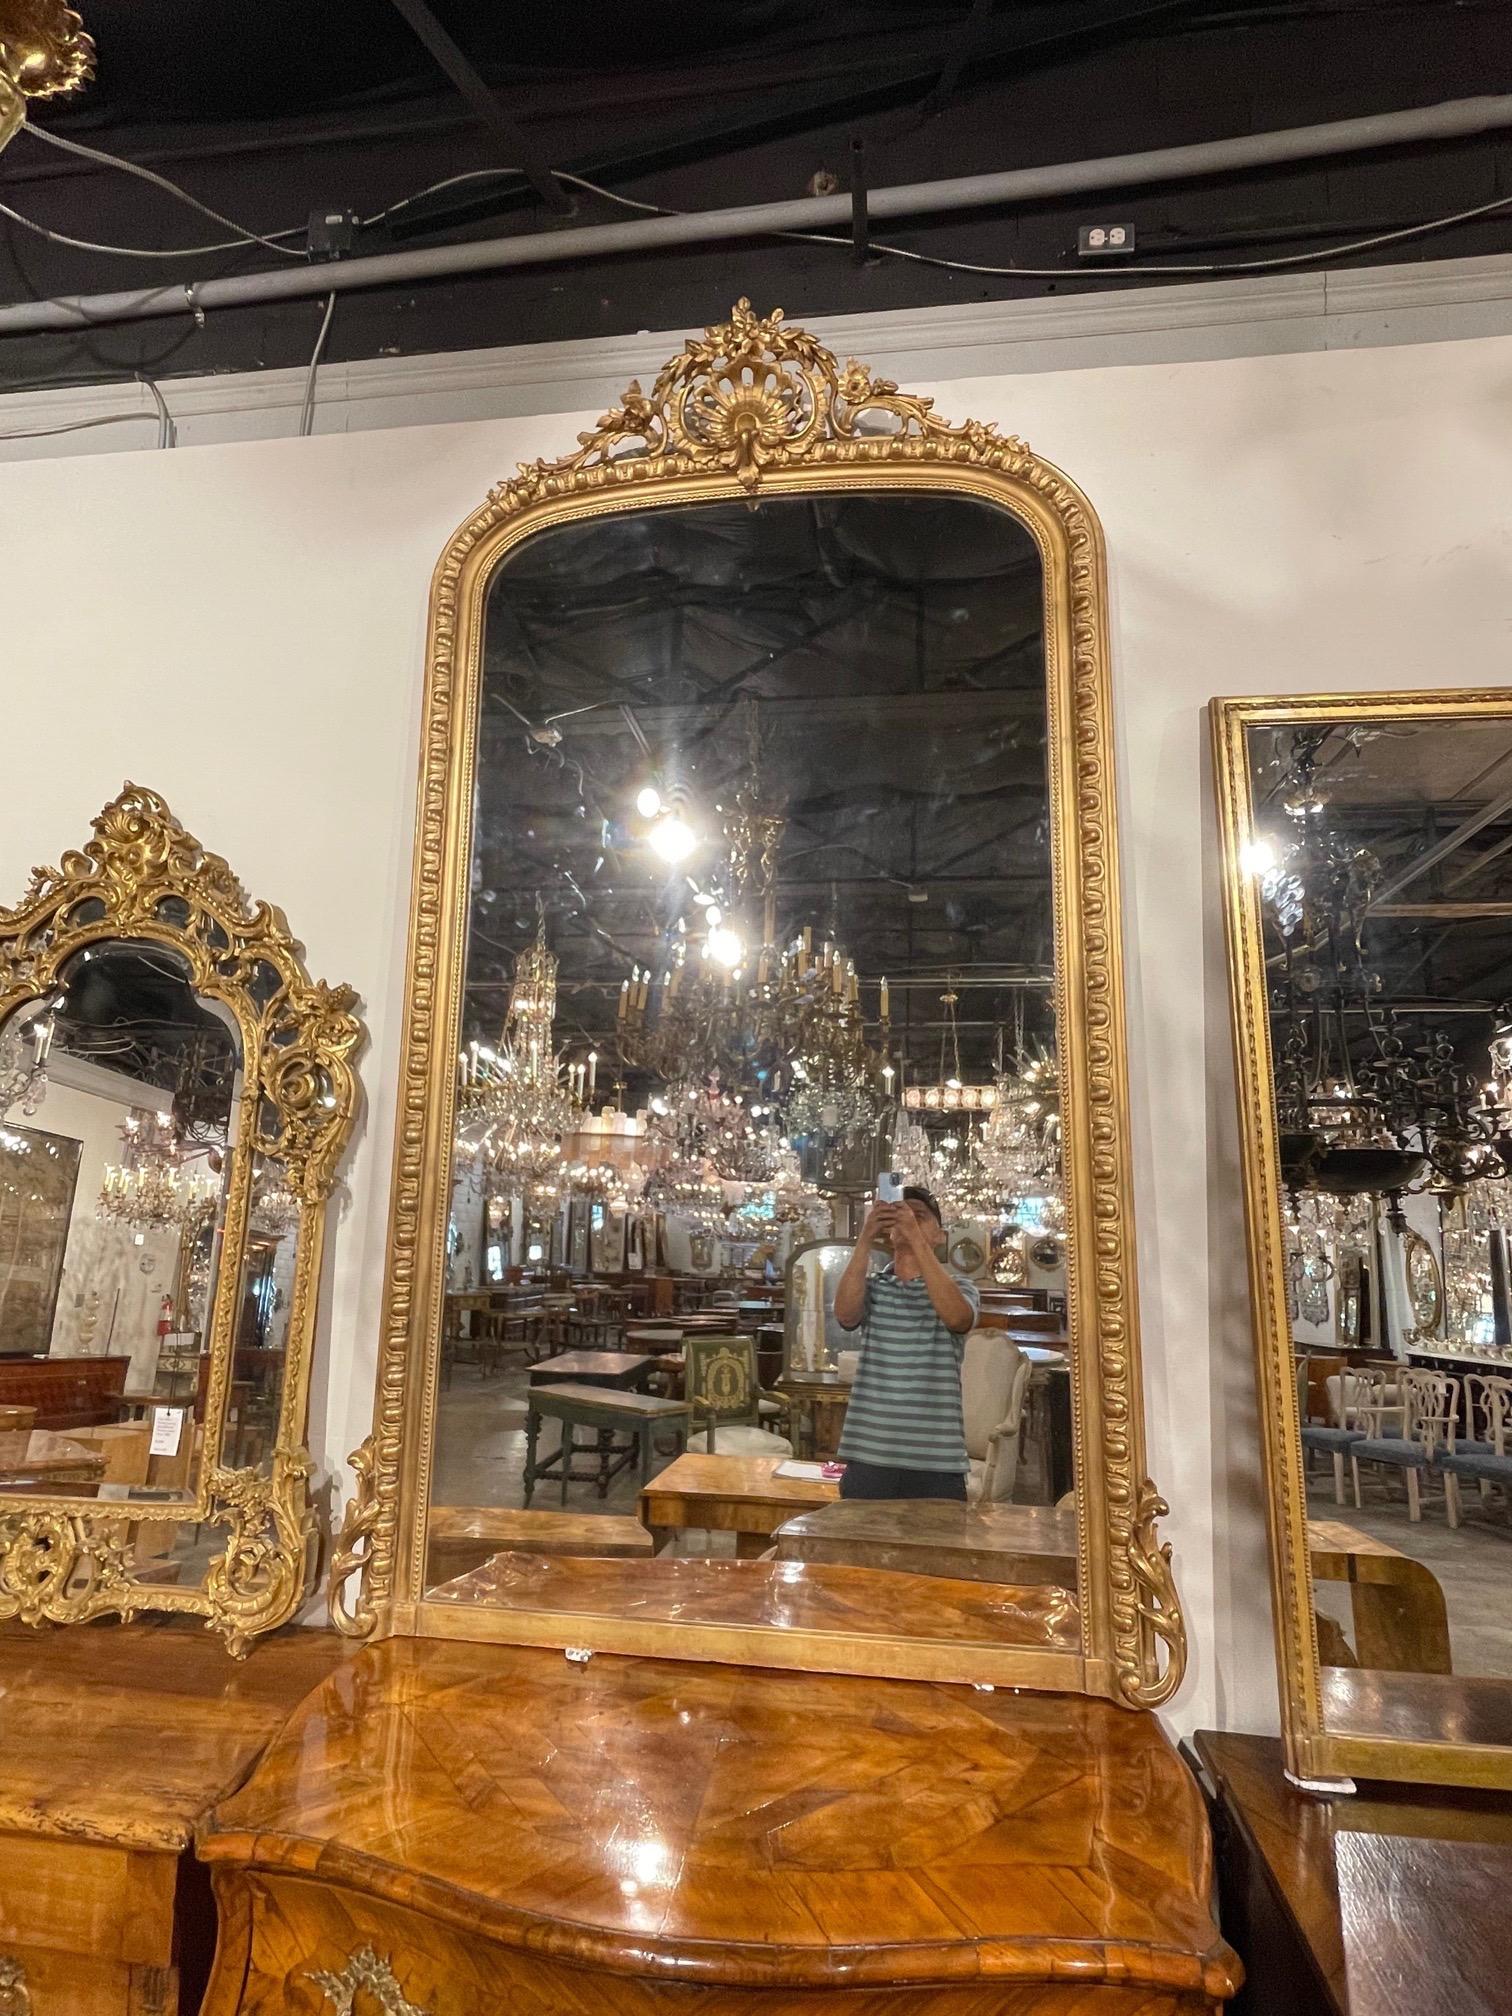 Exceptional large scale 19th century French Louis XVI style giltwood mirror. Beautiful carvings including an elaborate crown at the top with flowers. Gorgeous!!